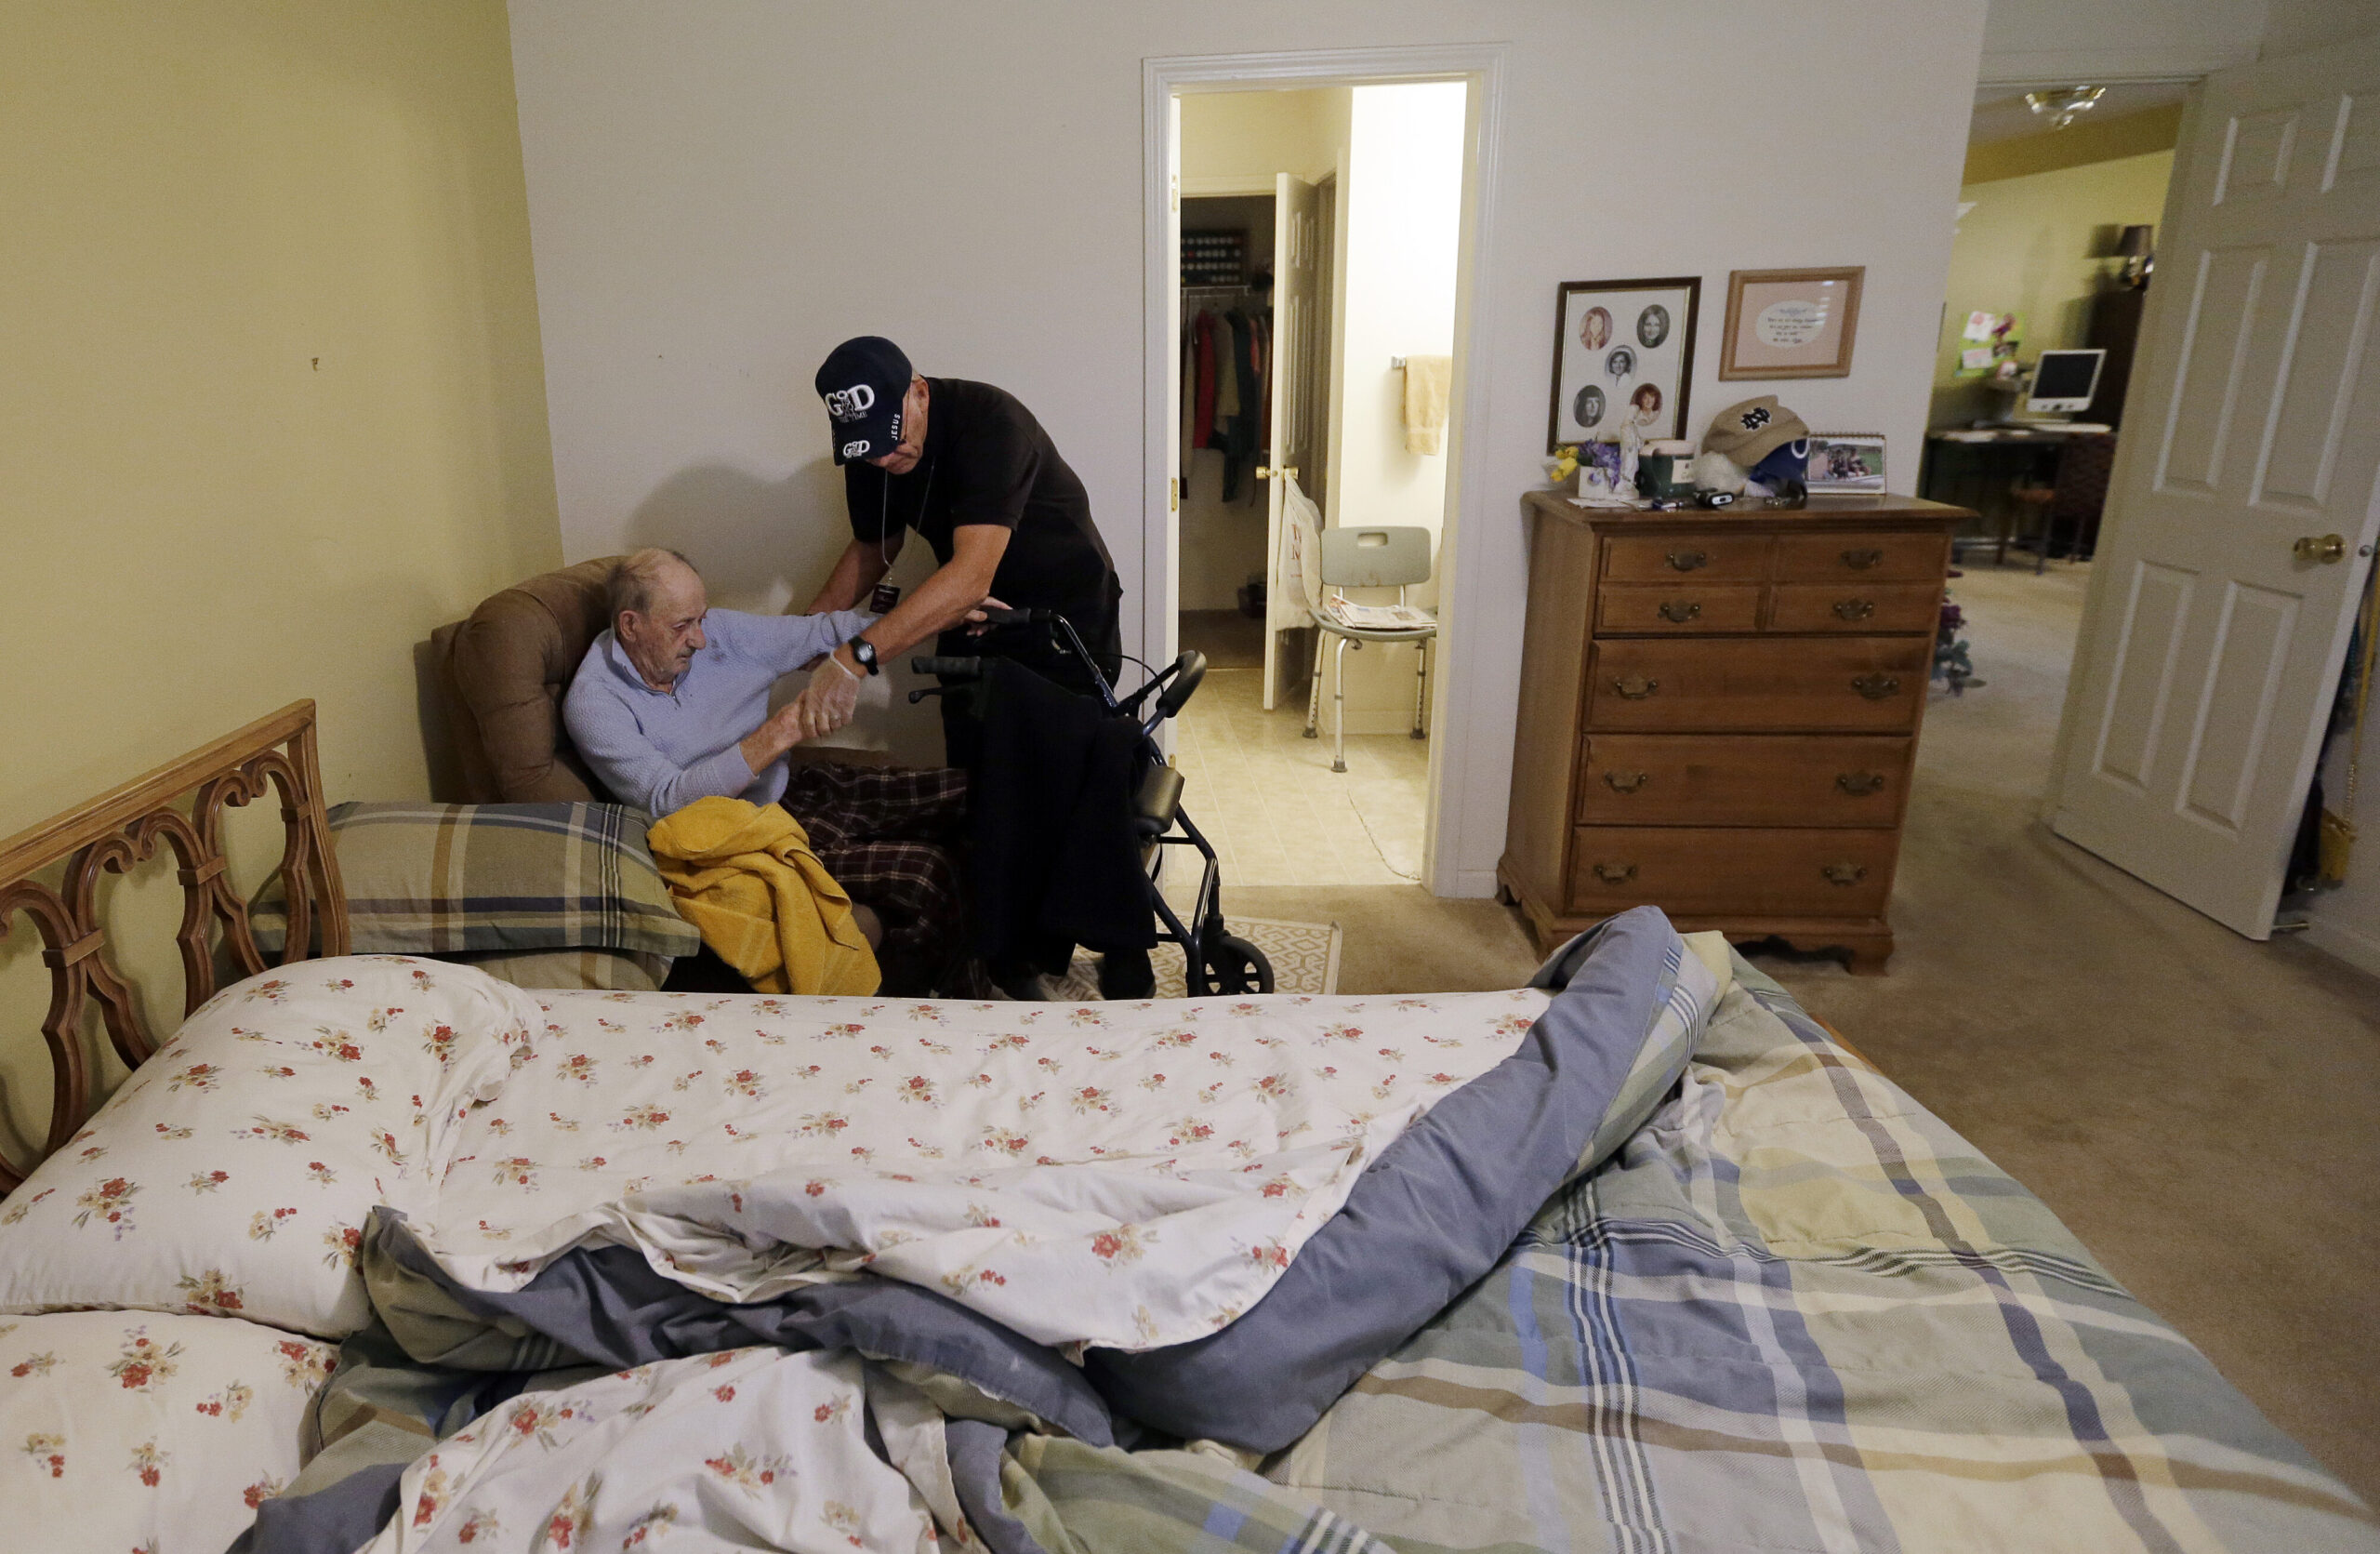 A caregiver helps an elderly person out of a chair